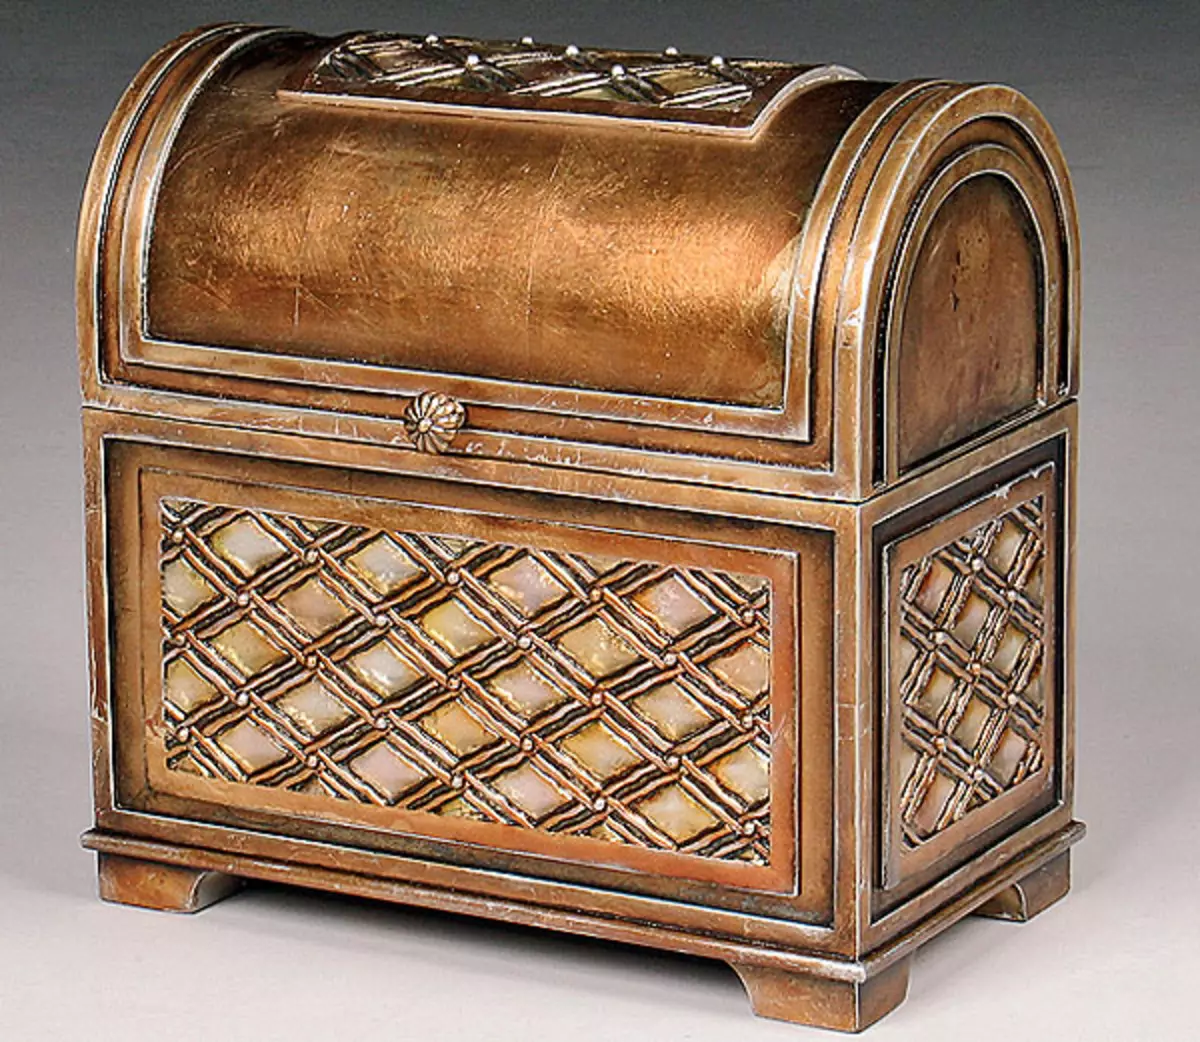 Long-lived chest